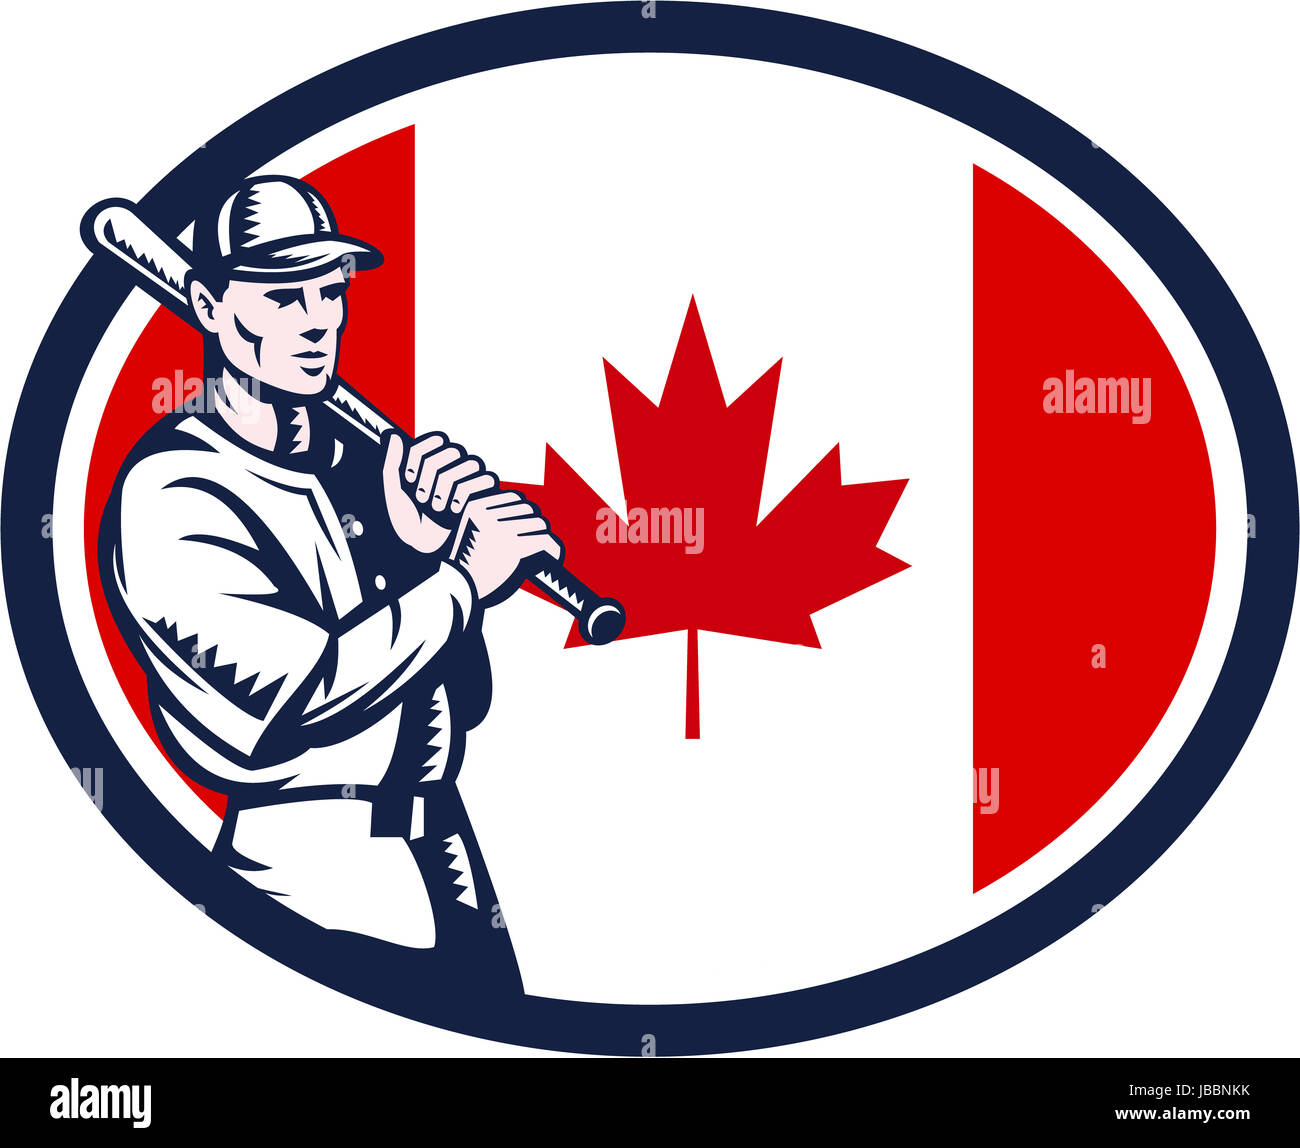 Illustration of a Canadian baseball player batter hitter holding bat on shoulder set inside oval shape with Canada maple leaf flag done in retro woodcut style isolated on white background. Stock Photo